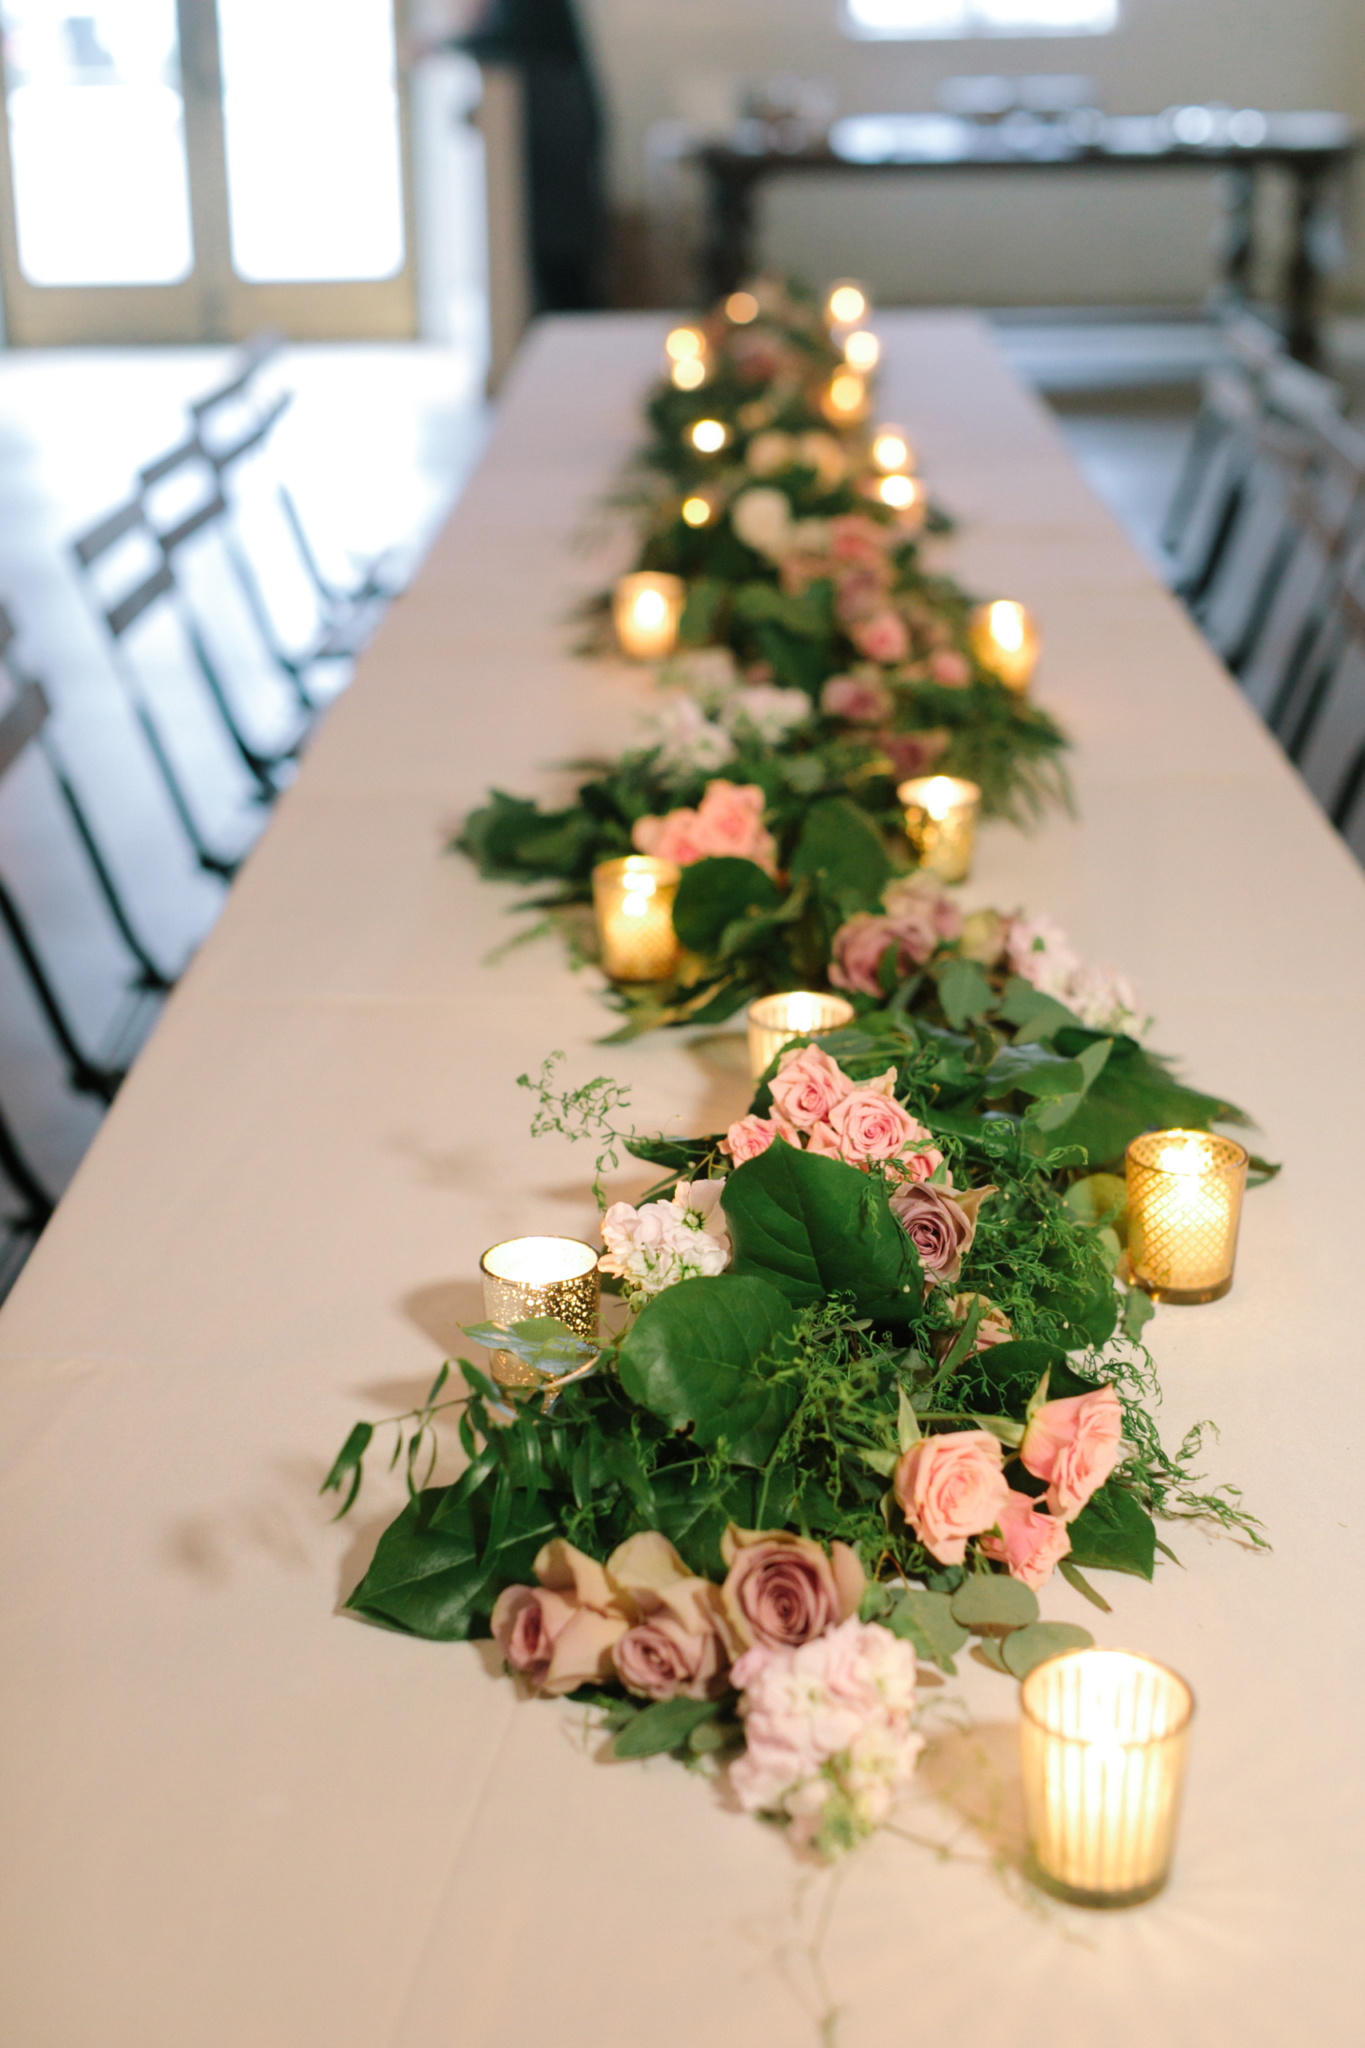 Table Runner with roses and votives